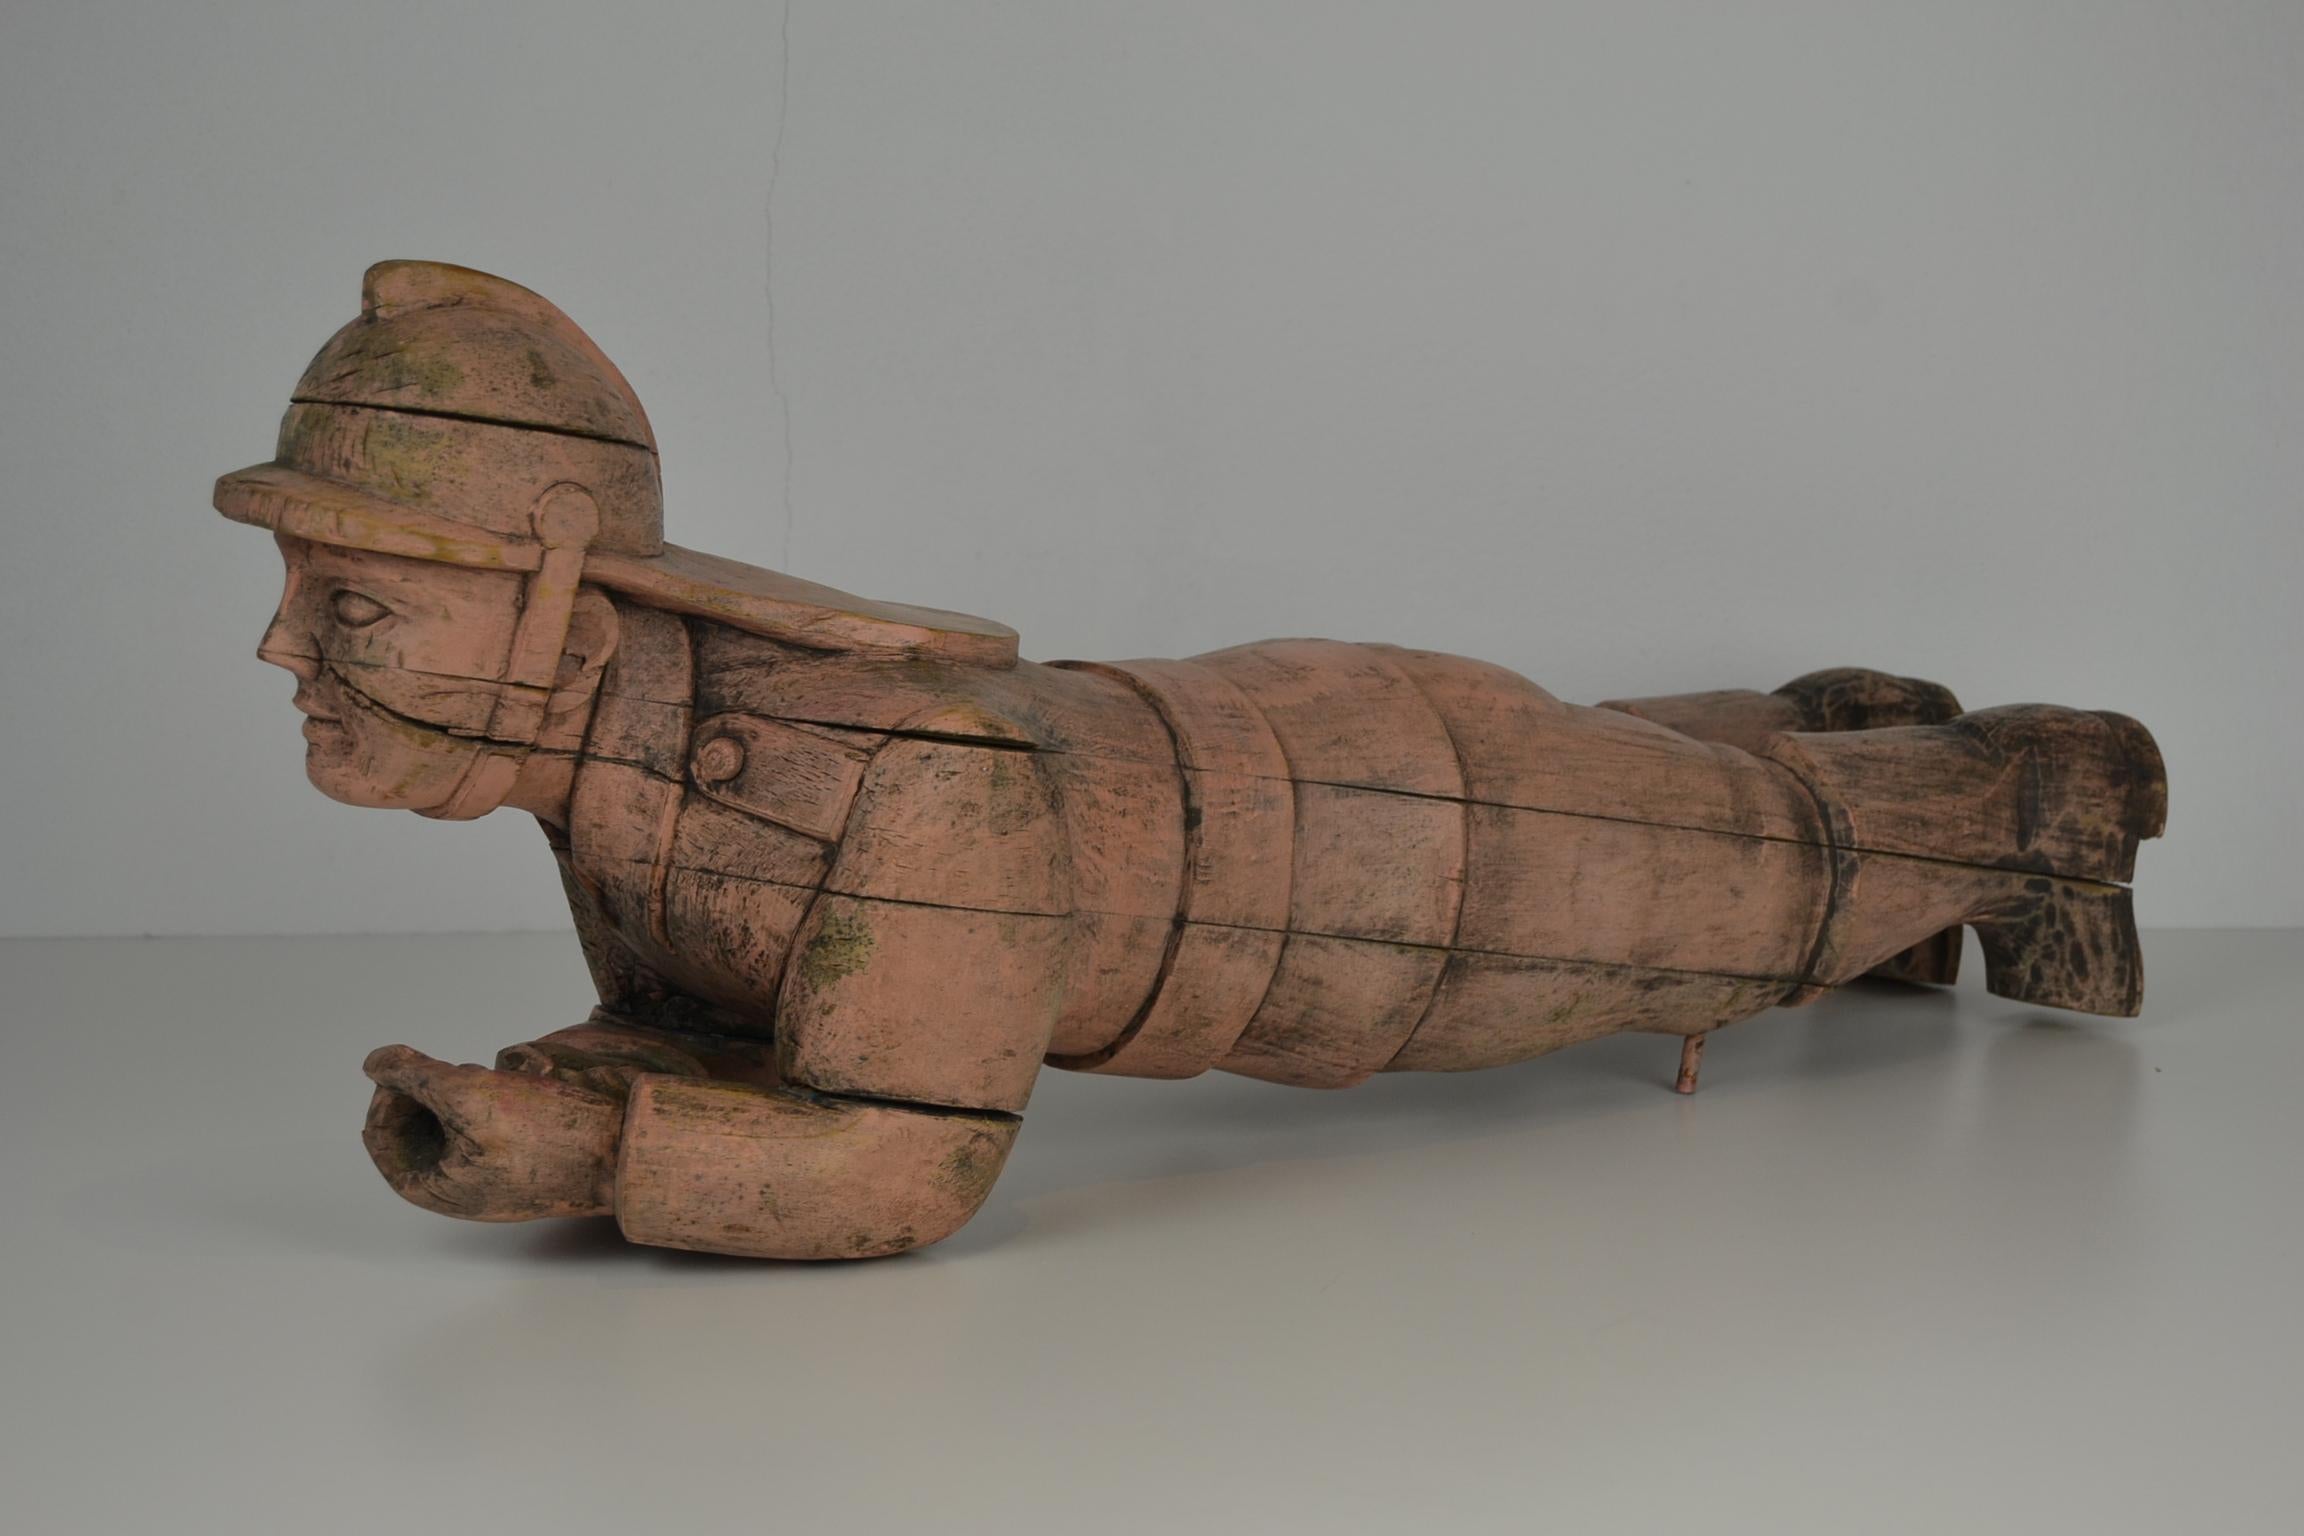 Original 1950s Hand-Carved wooden Fire Man Sculpture for Carousel or Merry-go-Round, 
made for Wilhelm Hennecke. This wooden sculpture of a Firefighter was used  on a carnival ride Fire Truck on the ladder. This Carousel Sculpture was made for the